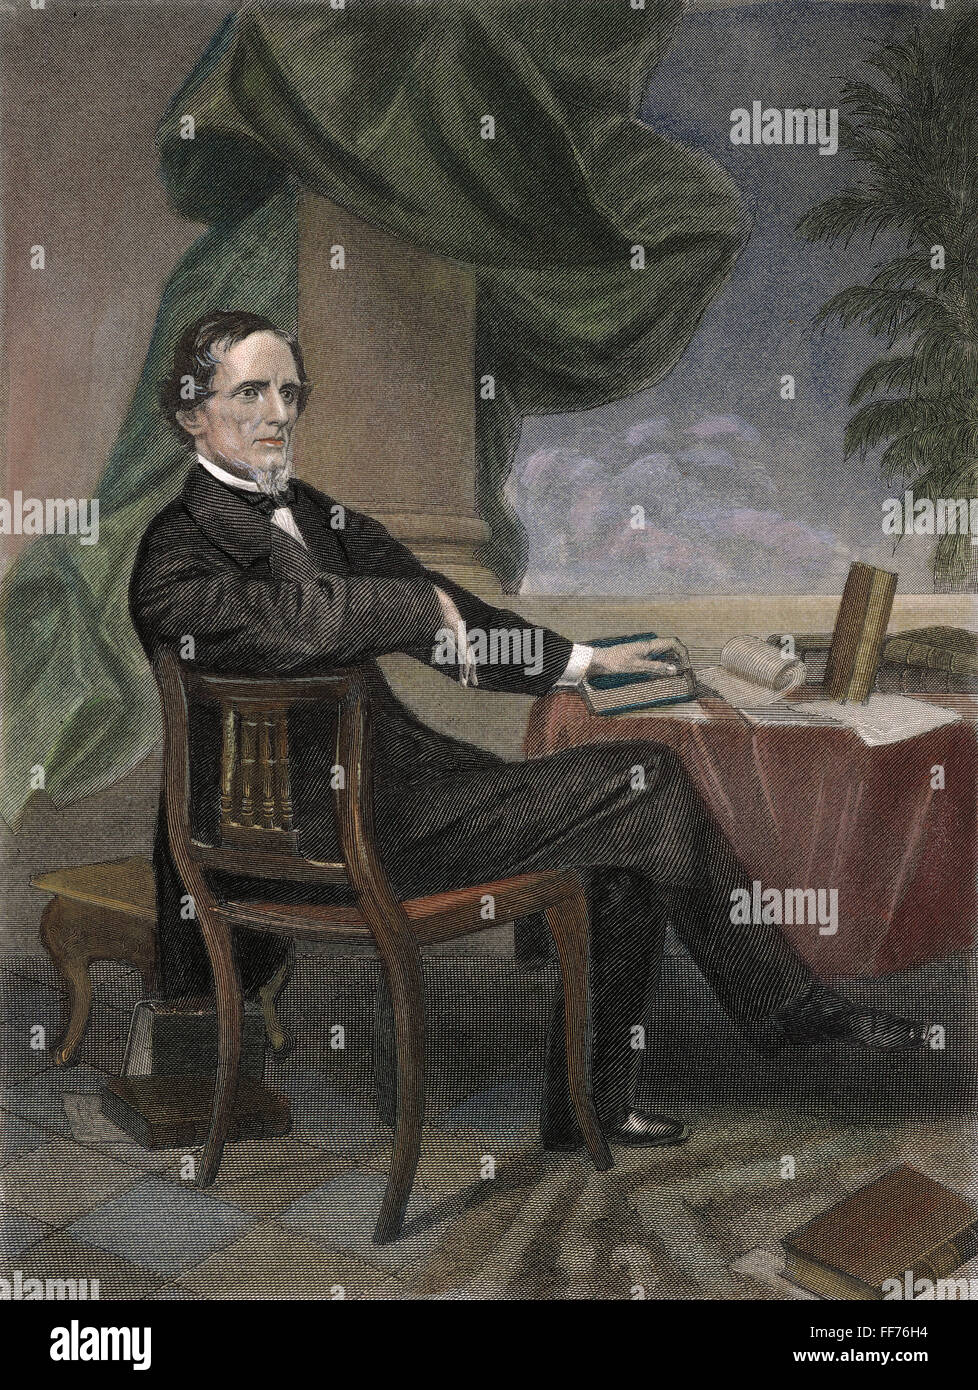 JEFFERSON DAVIS /n(1808-1889). President of the Confederate States of America. Engraving, 1866. Stock Photo